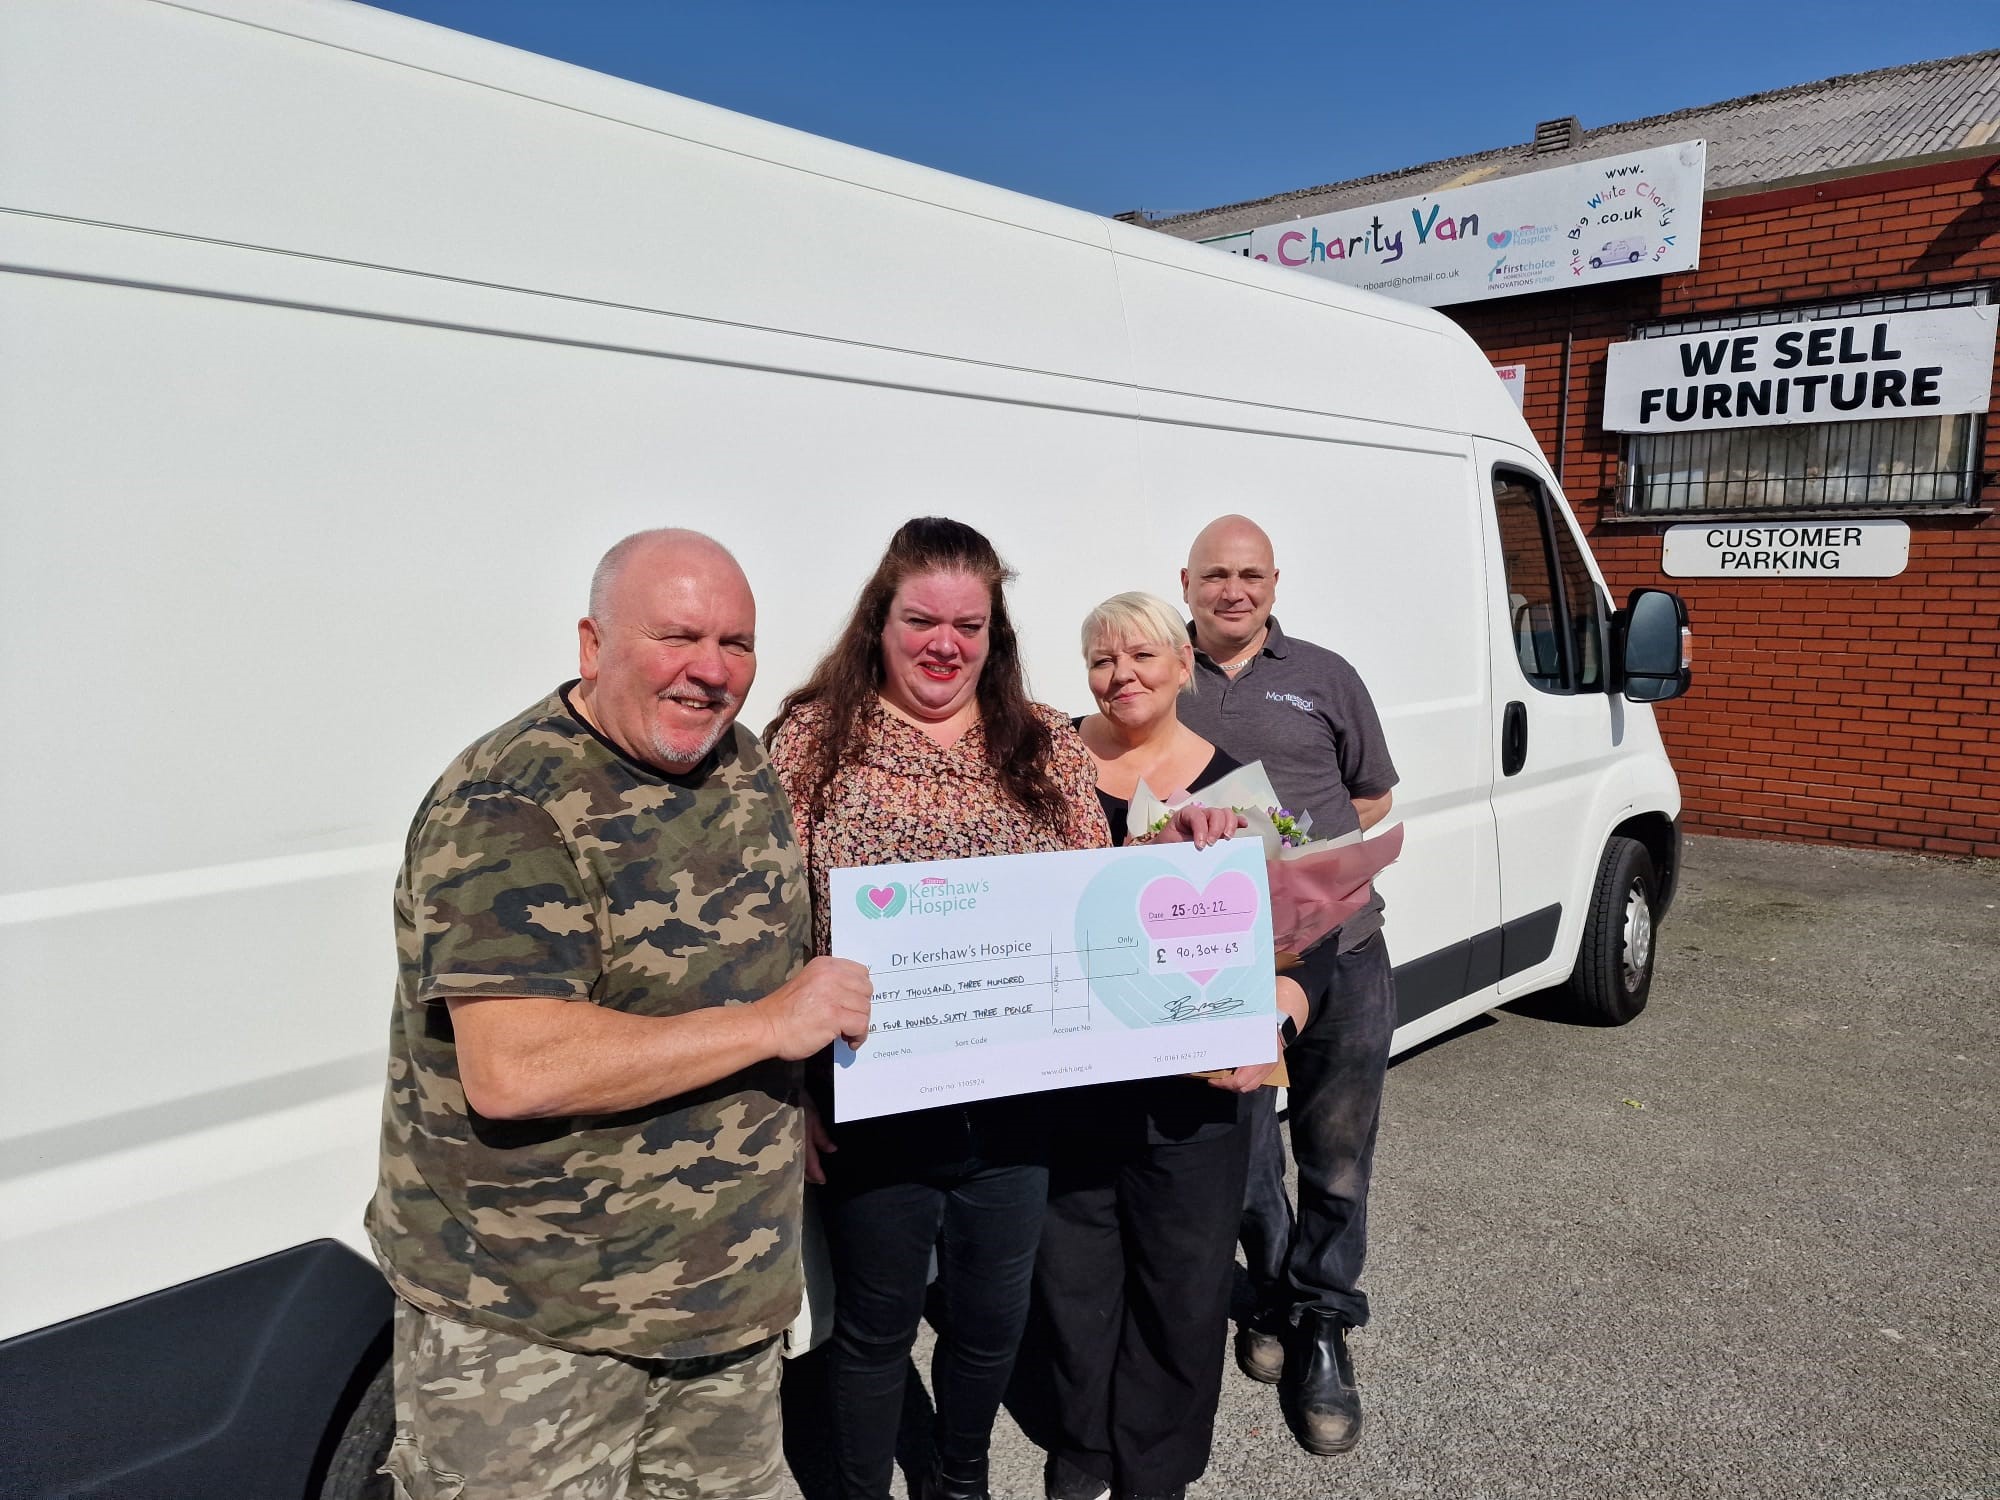 L-R: Charlie from The Big White Charity Van, Laura from the Hospice’s Retail Team, and Dawn and Malcolm also from The Big White Charity Van